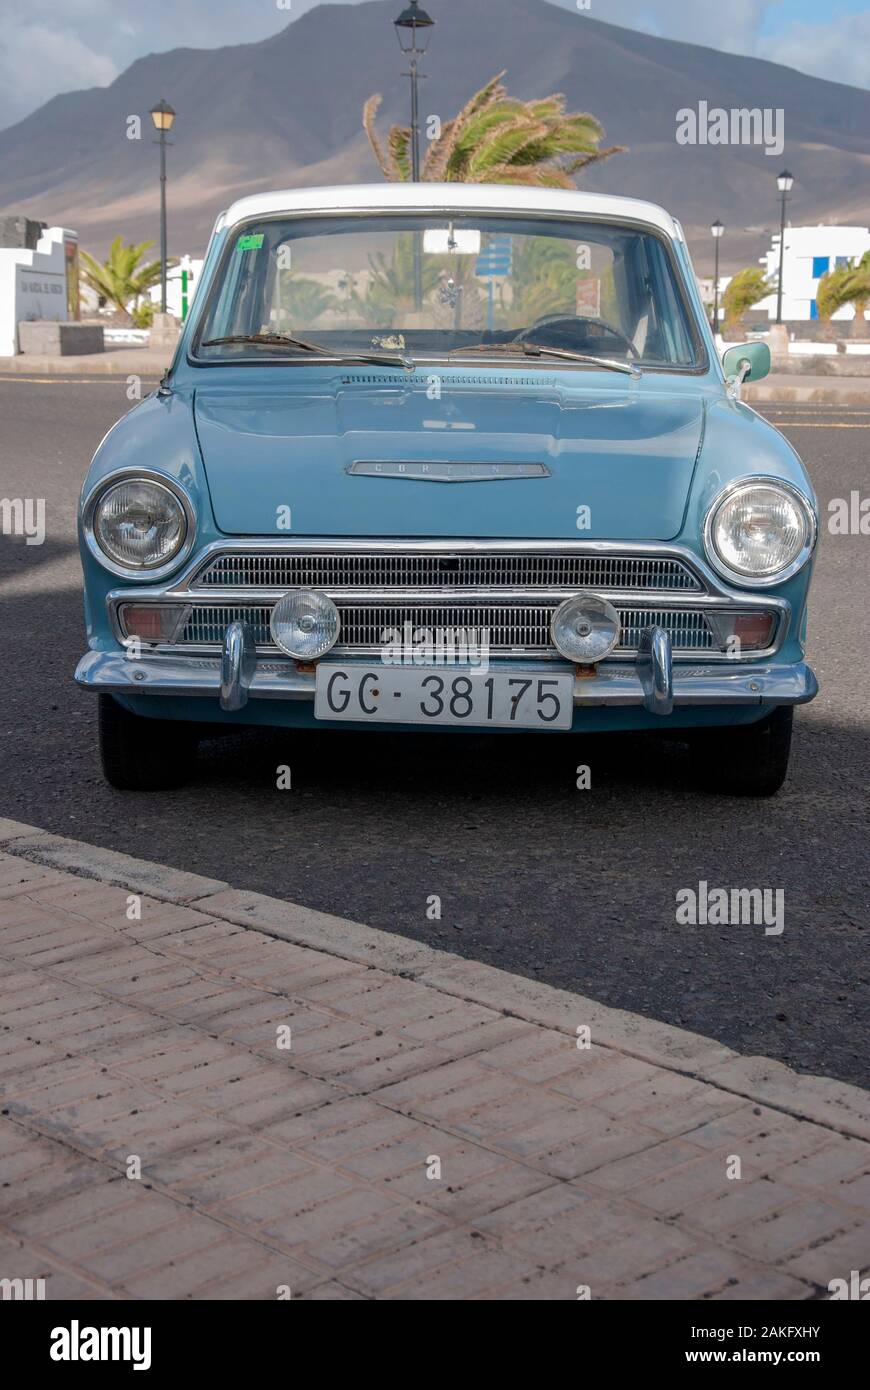 1960's Model Light Blue White Mark One Ford Cortina Motor Car front low angle view of rusty lhd left hand drive four door 4 door ford cortina mk 1 mar Stock Photo